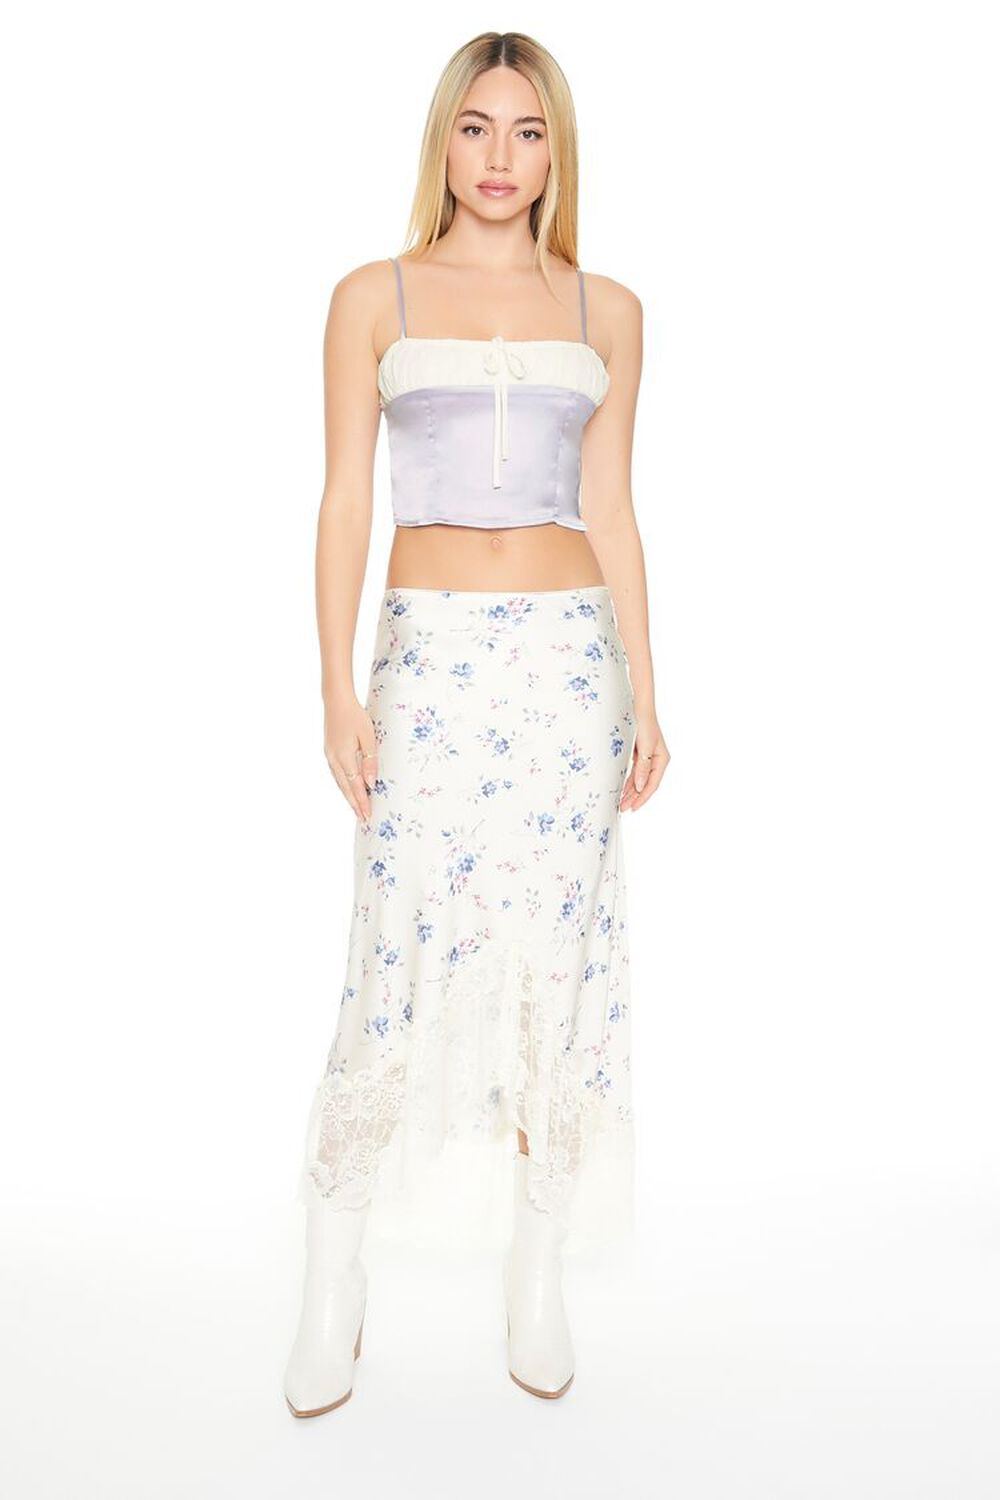 Our @dillards exclusive Isabelle cami short set in Lilac